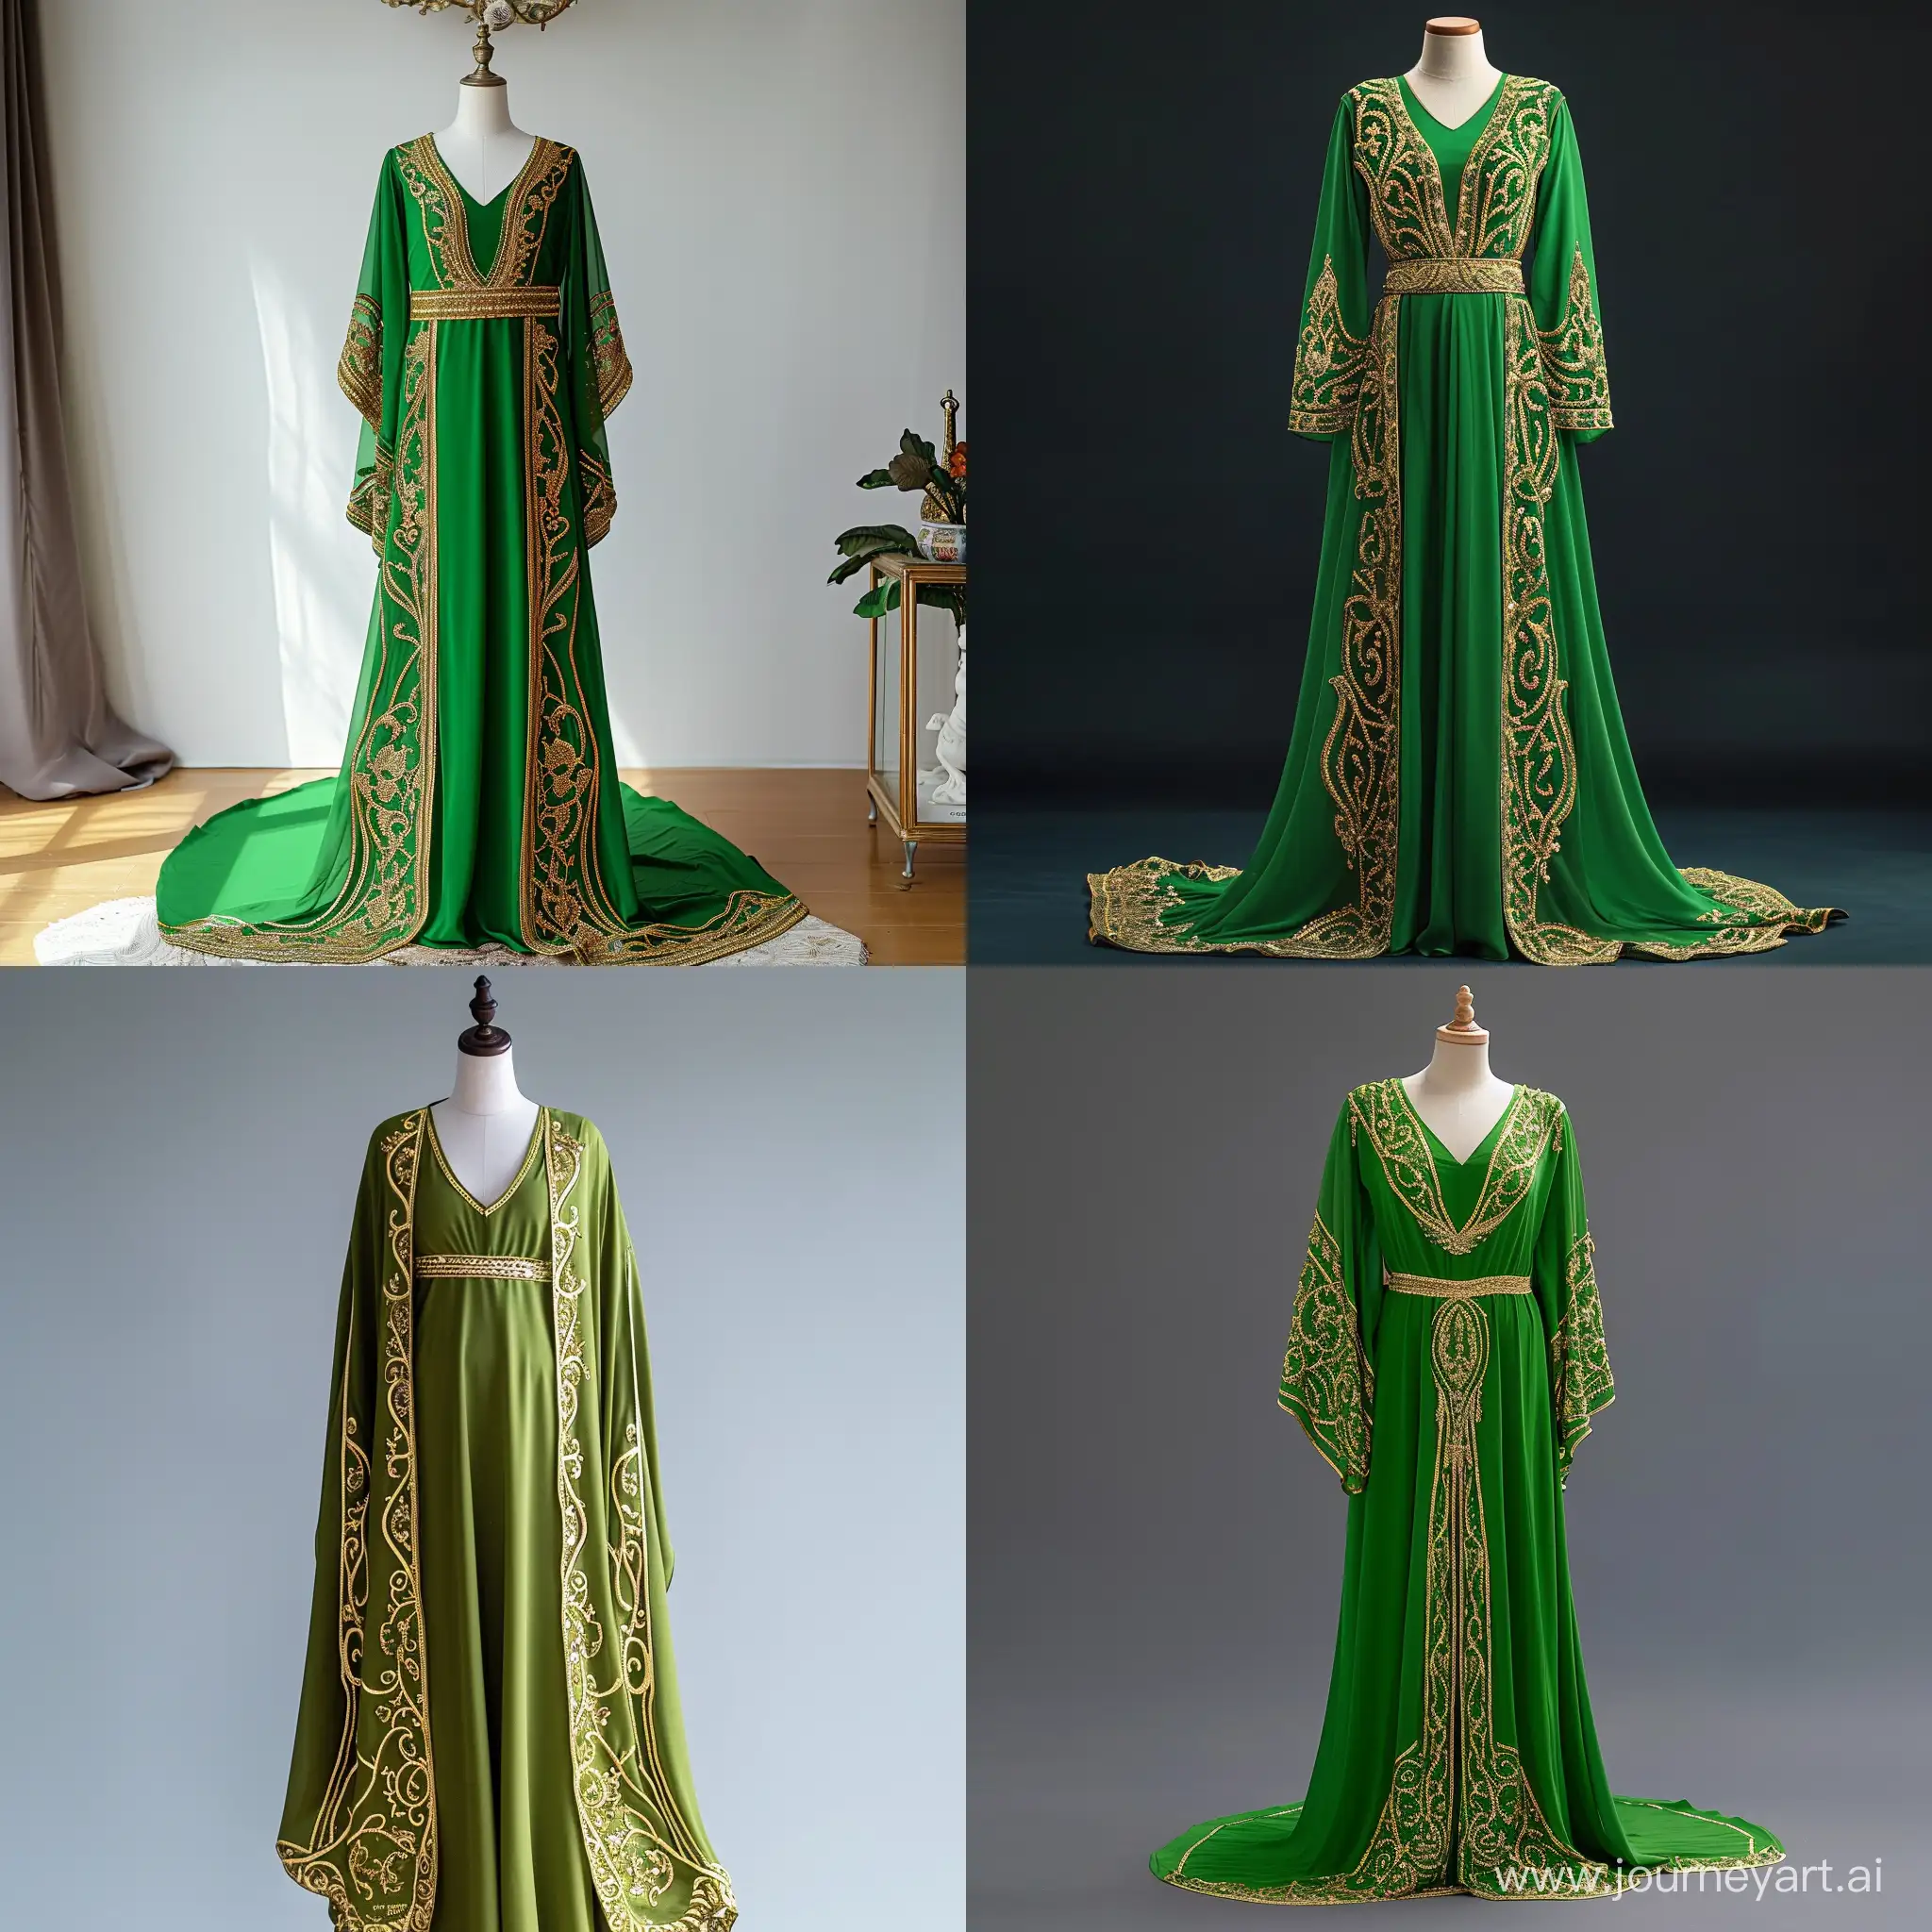 Elegant-Green-Caftan-with-Intricate-Golden-Embroidery-on-Mannequin